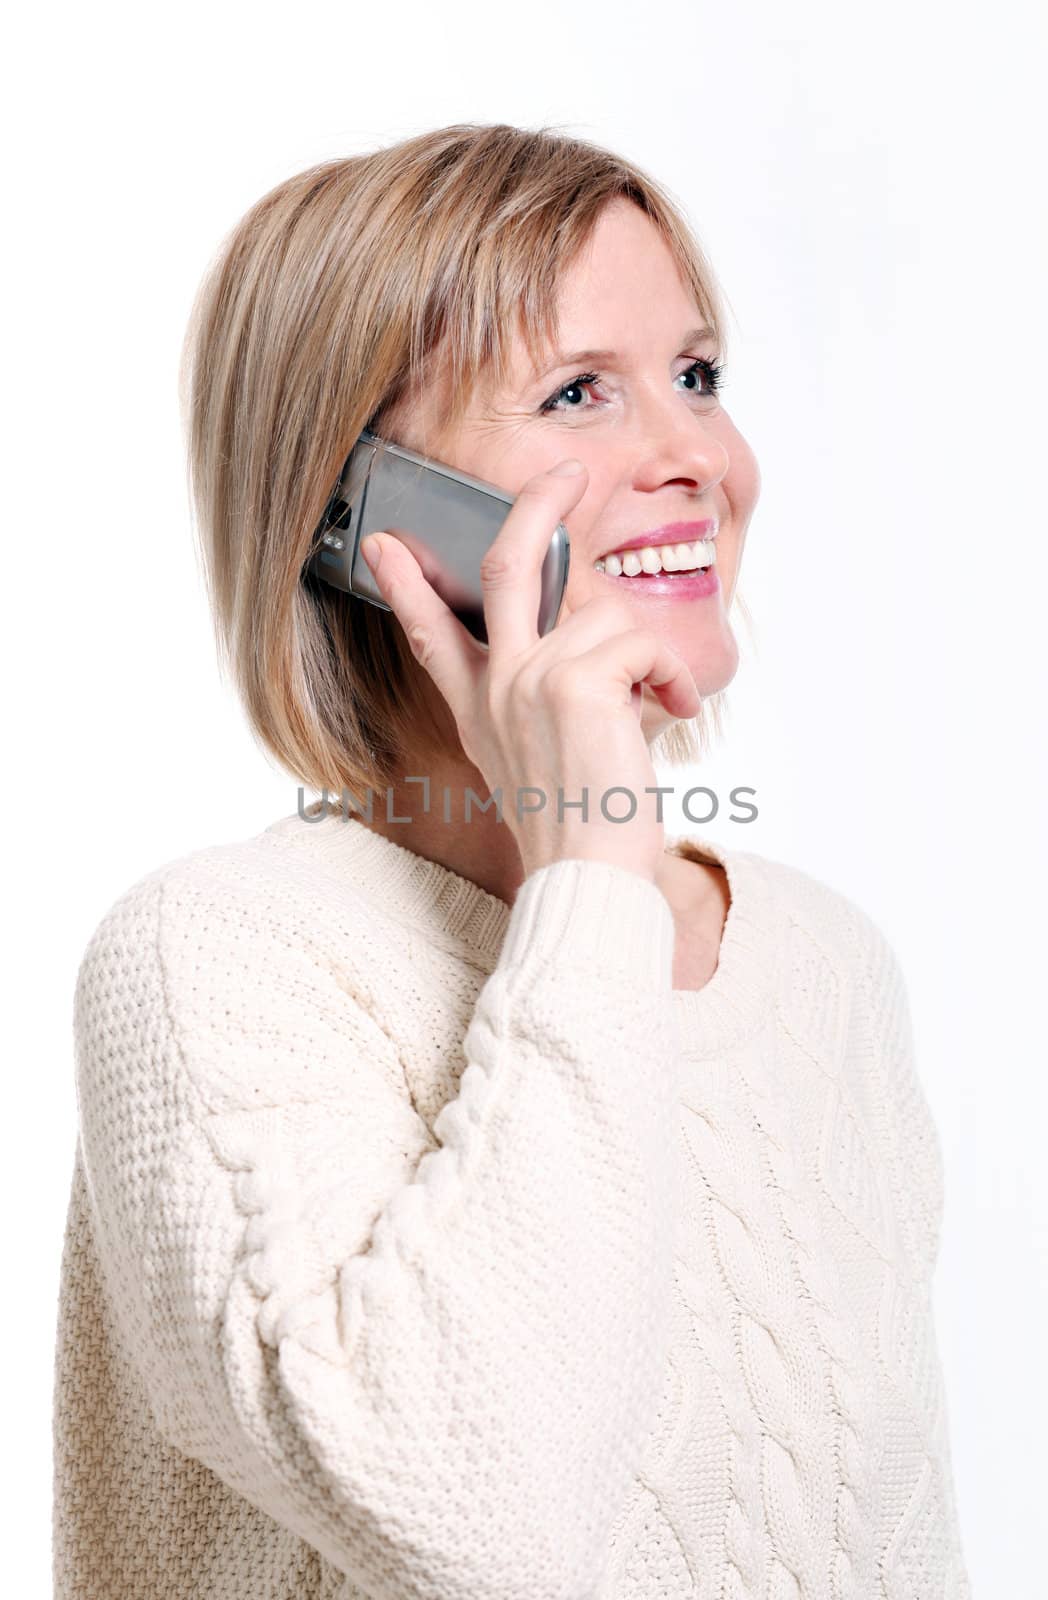 Caucasian middle aged woman on cellphone smiling over white background